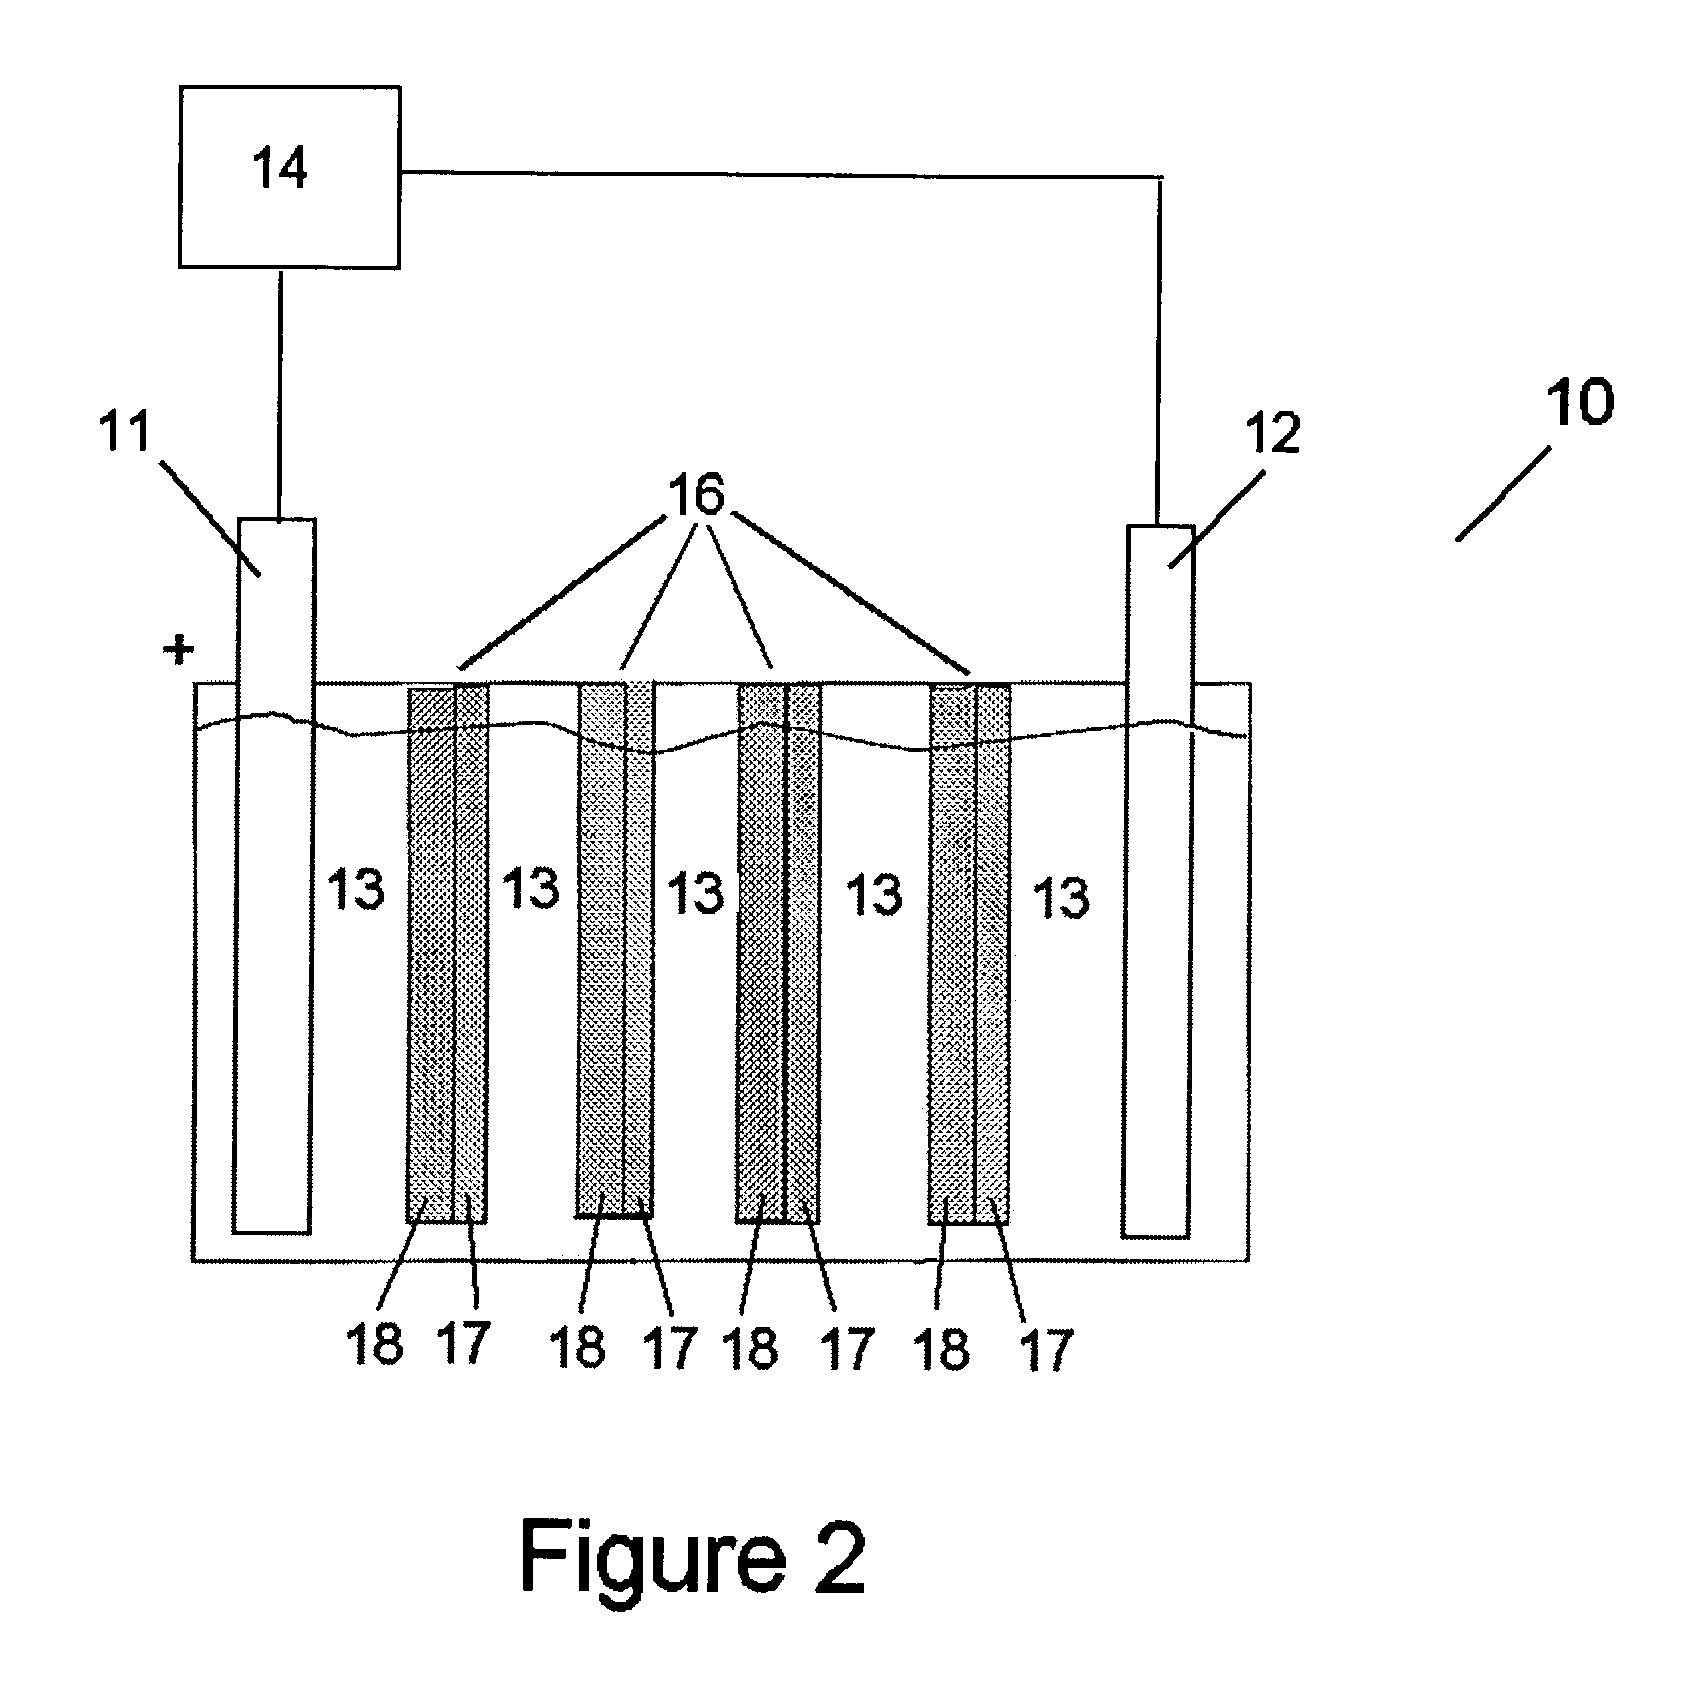 Method for producing and transporting hydrogen